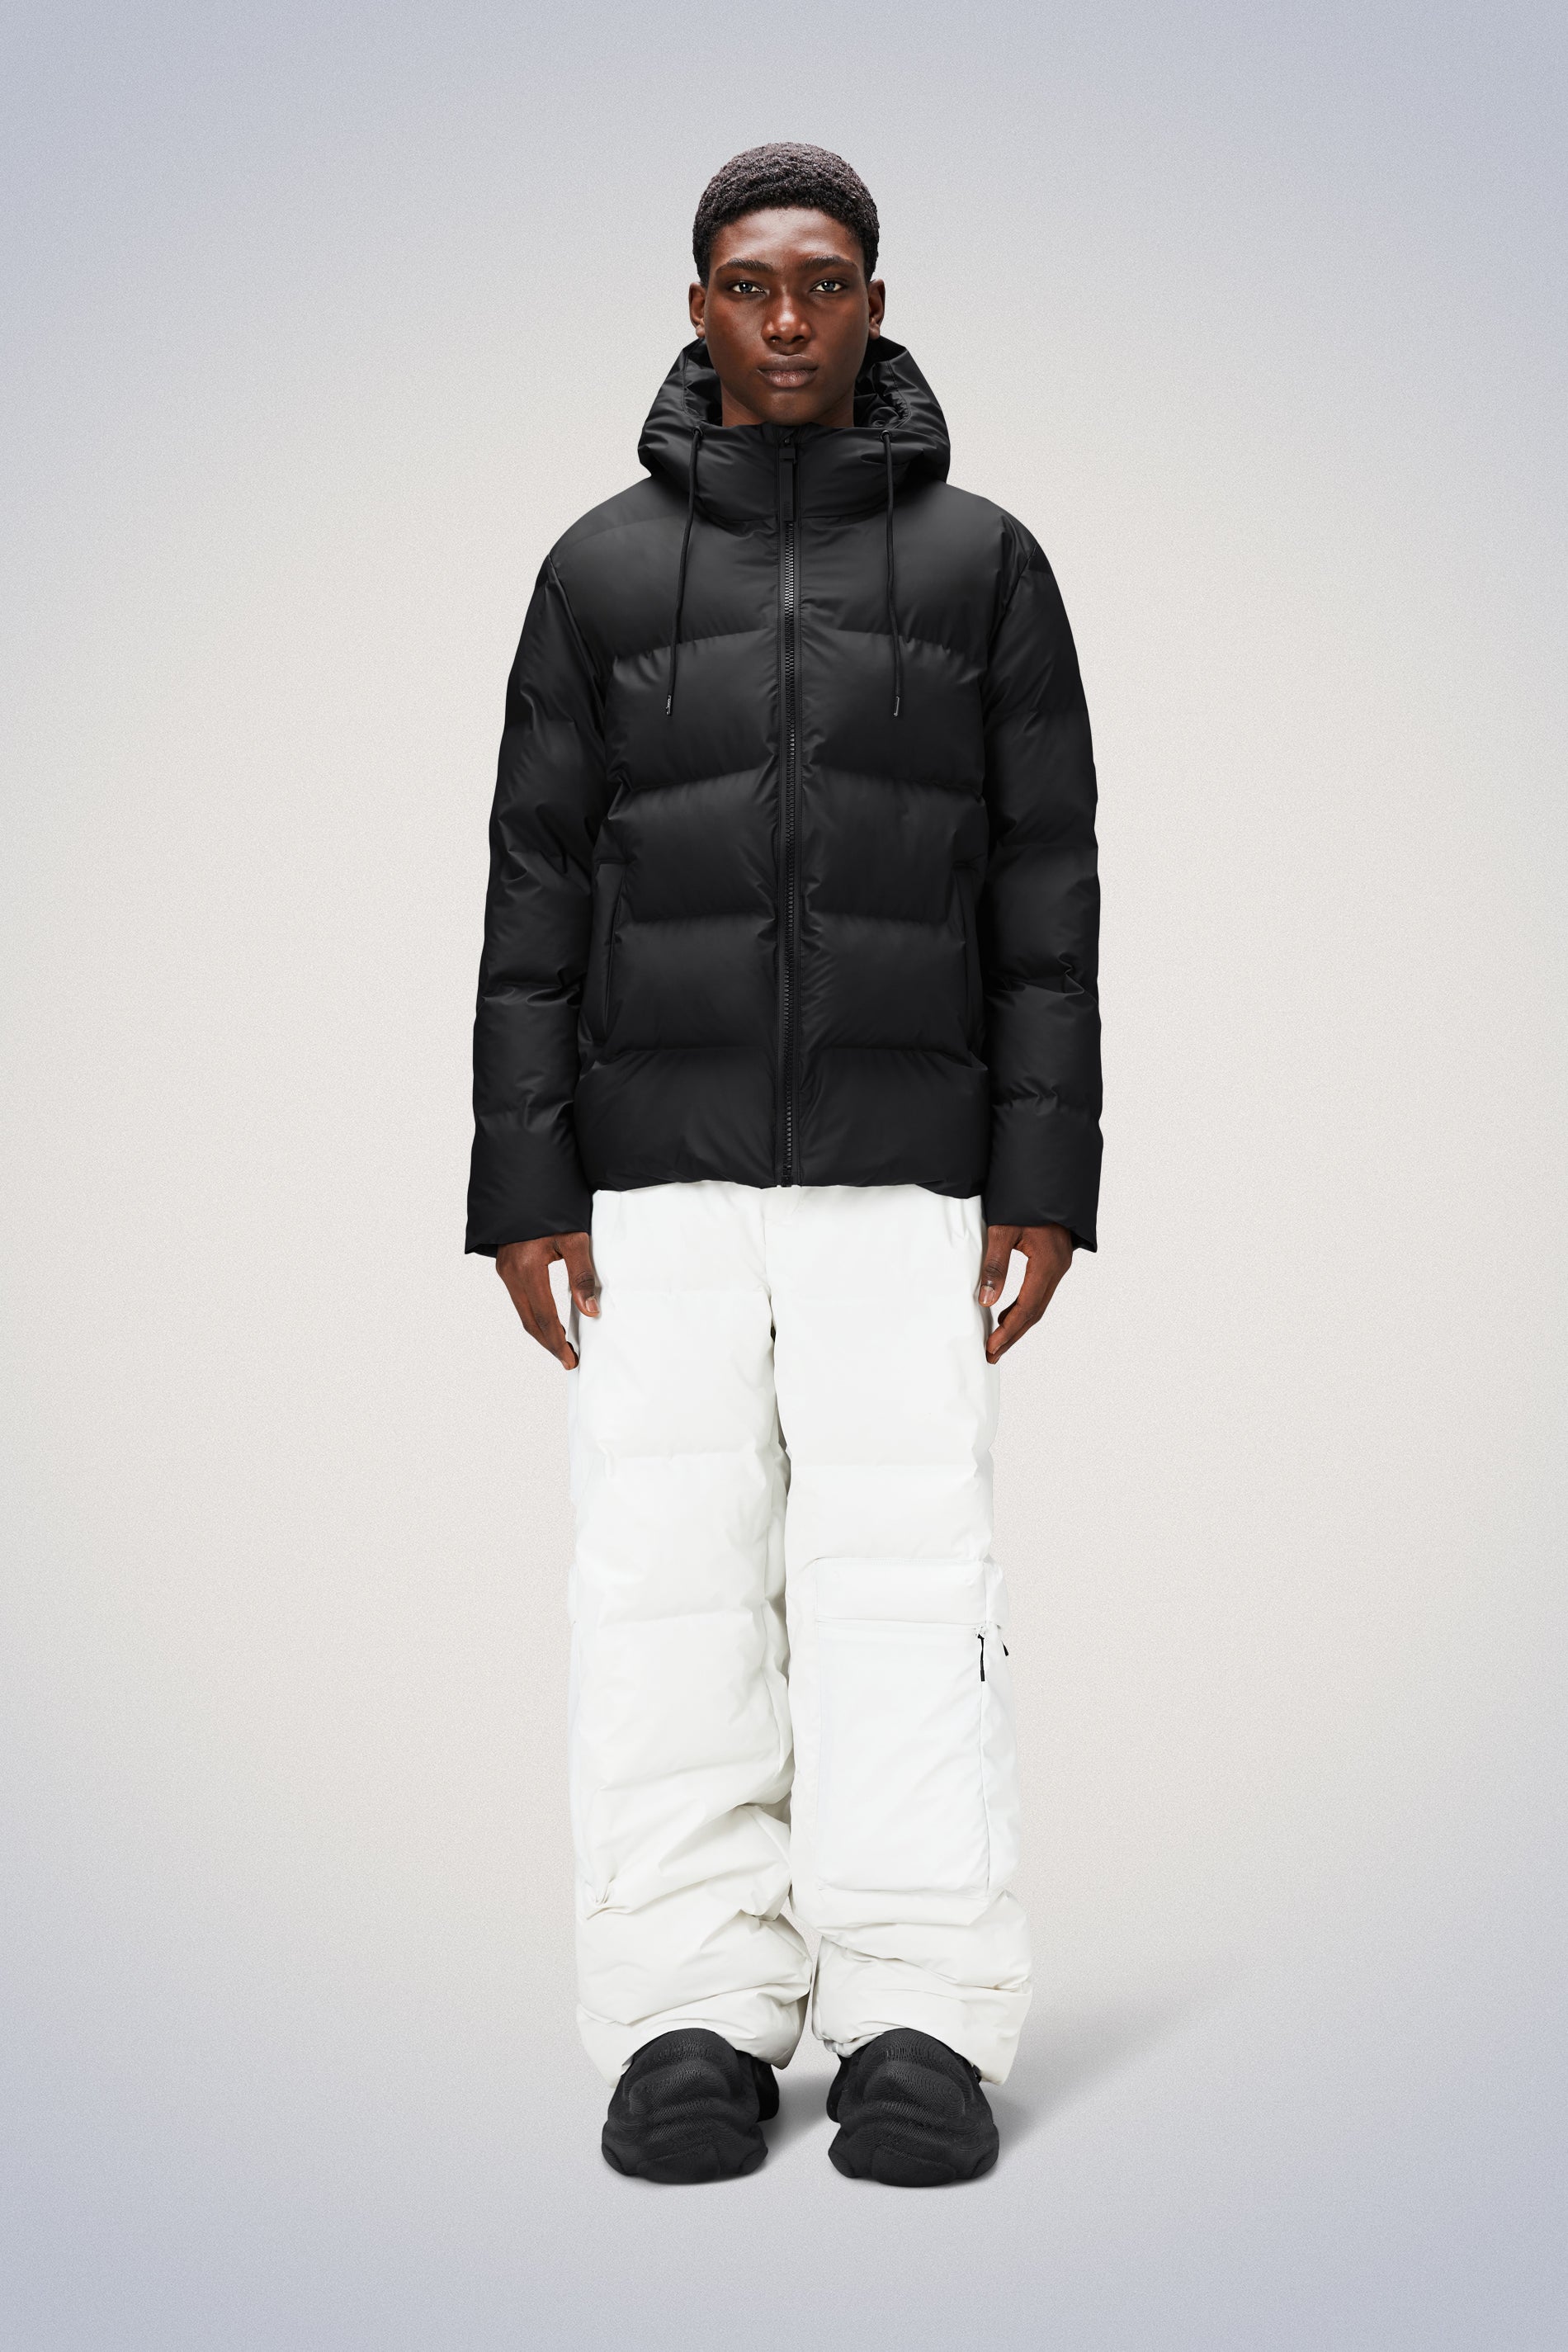 Rains® Alta Puffer Jacket in Black for $430